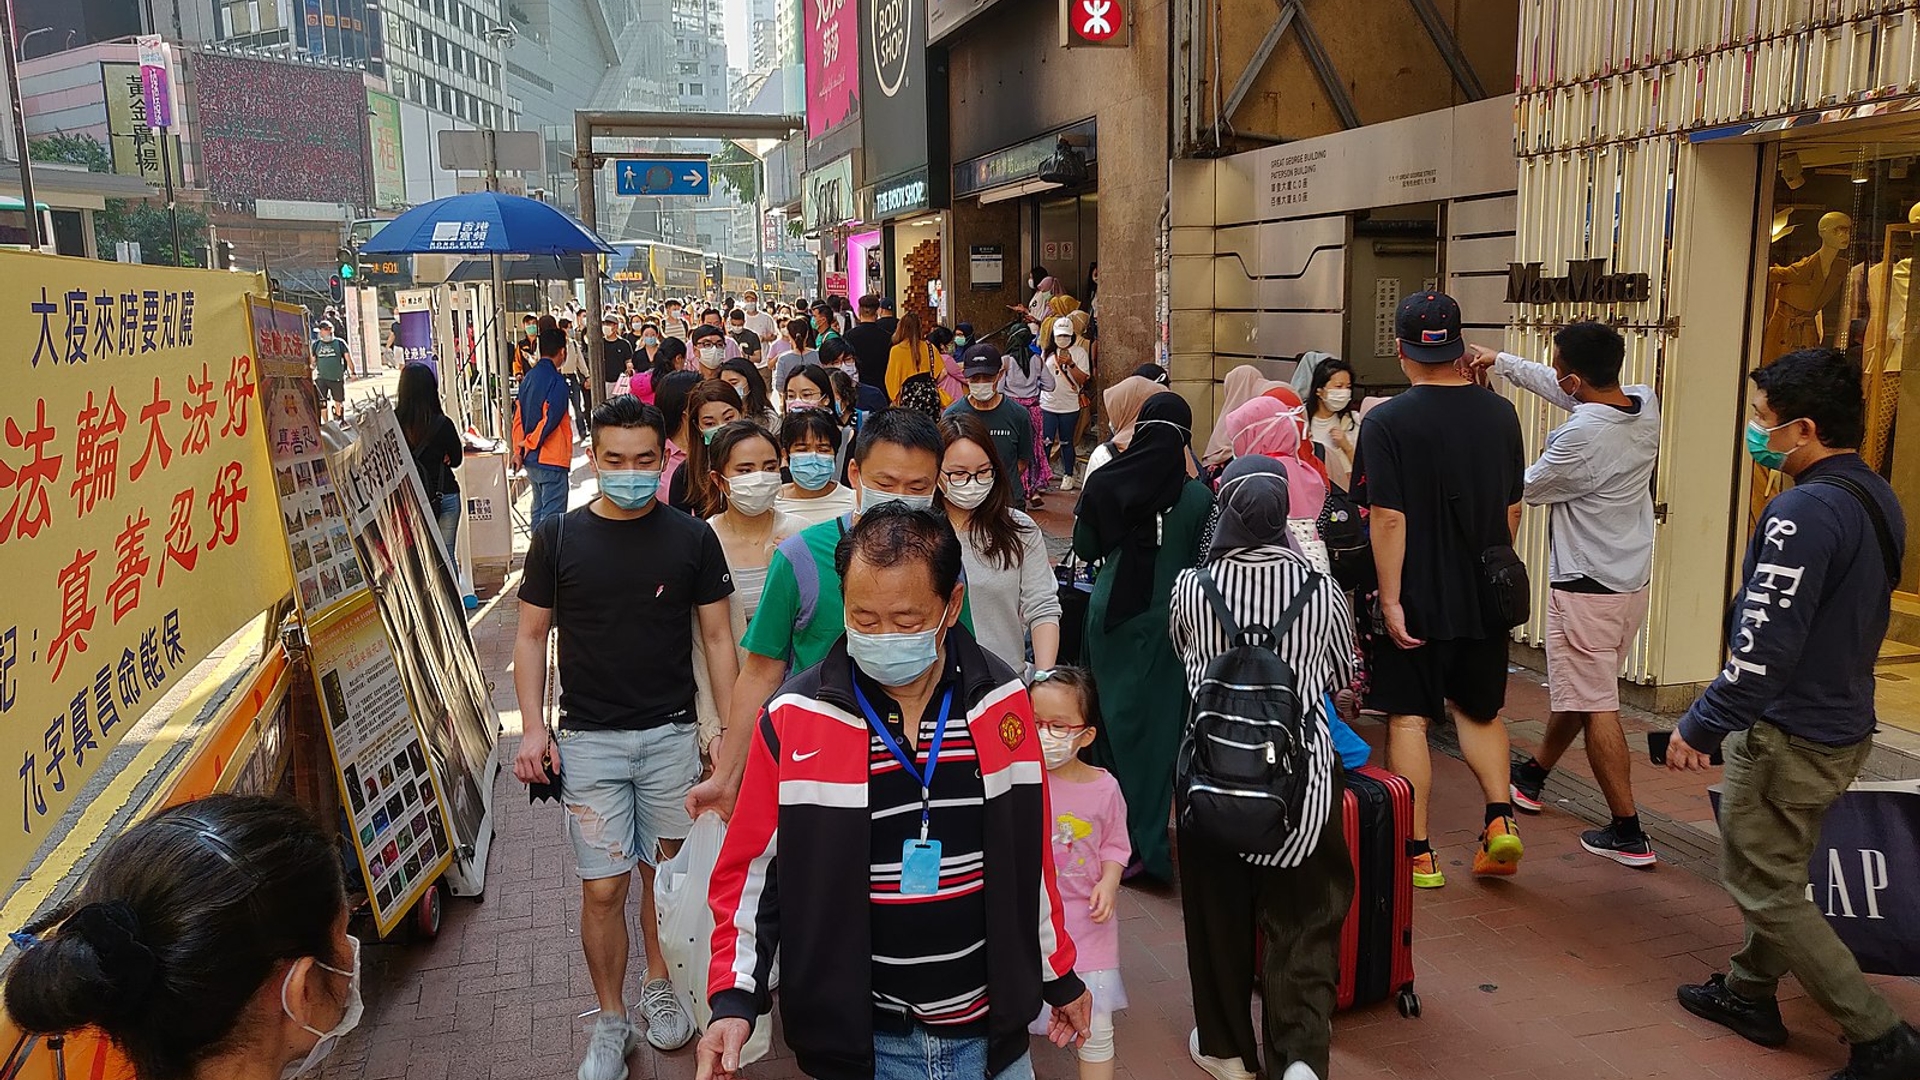 1600px-Street_in_Hong_Kong_during_the_COVID-19_pandemic